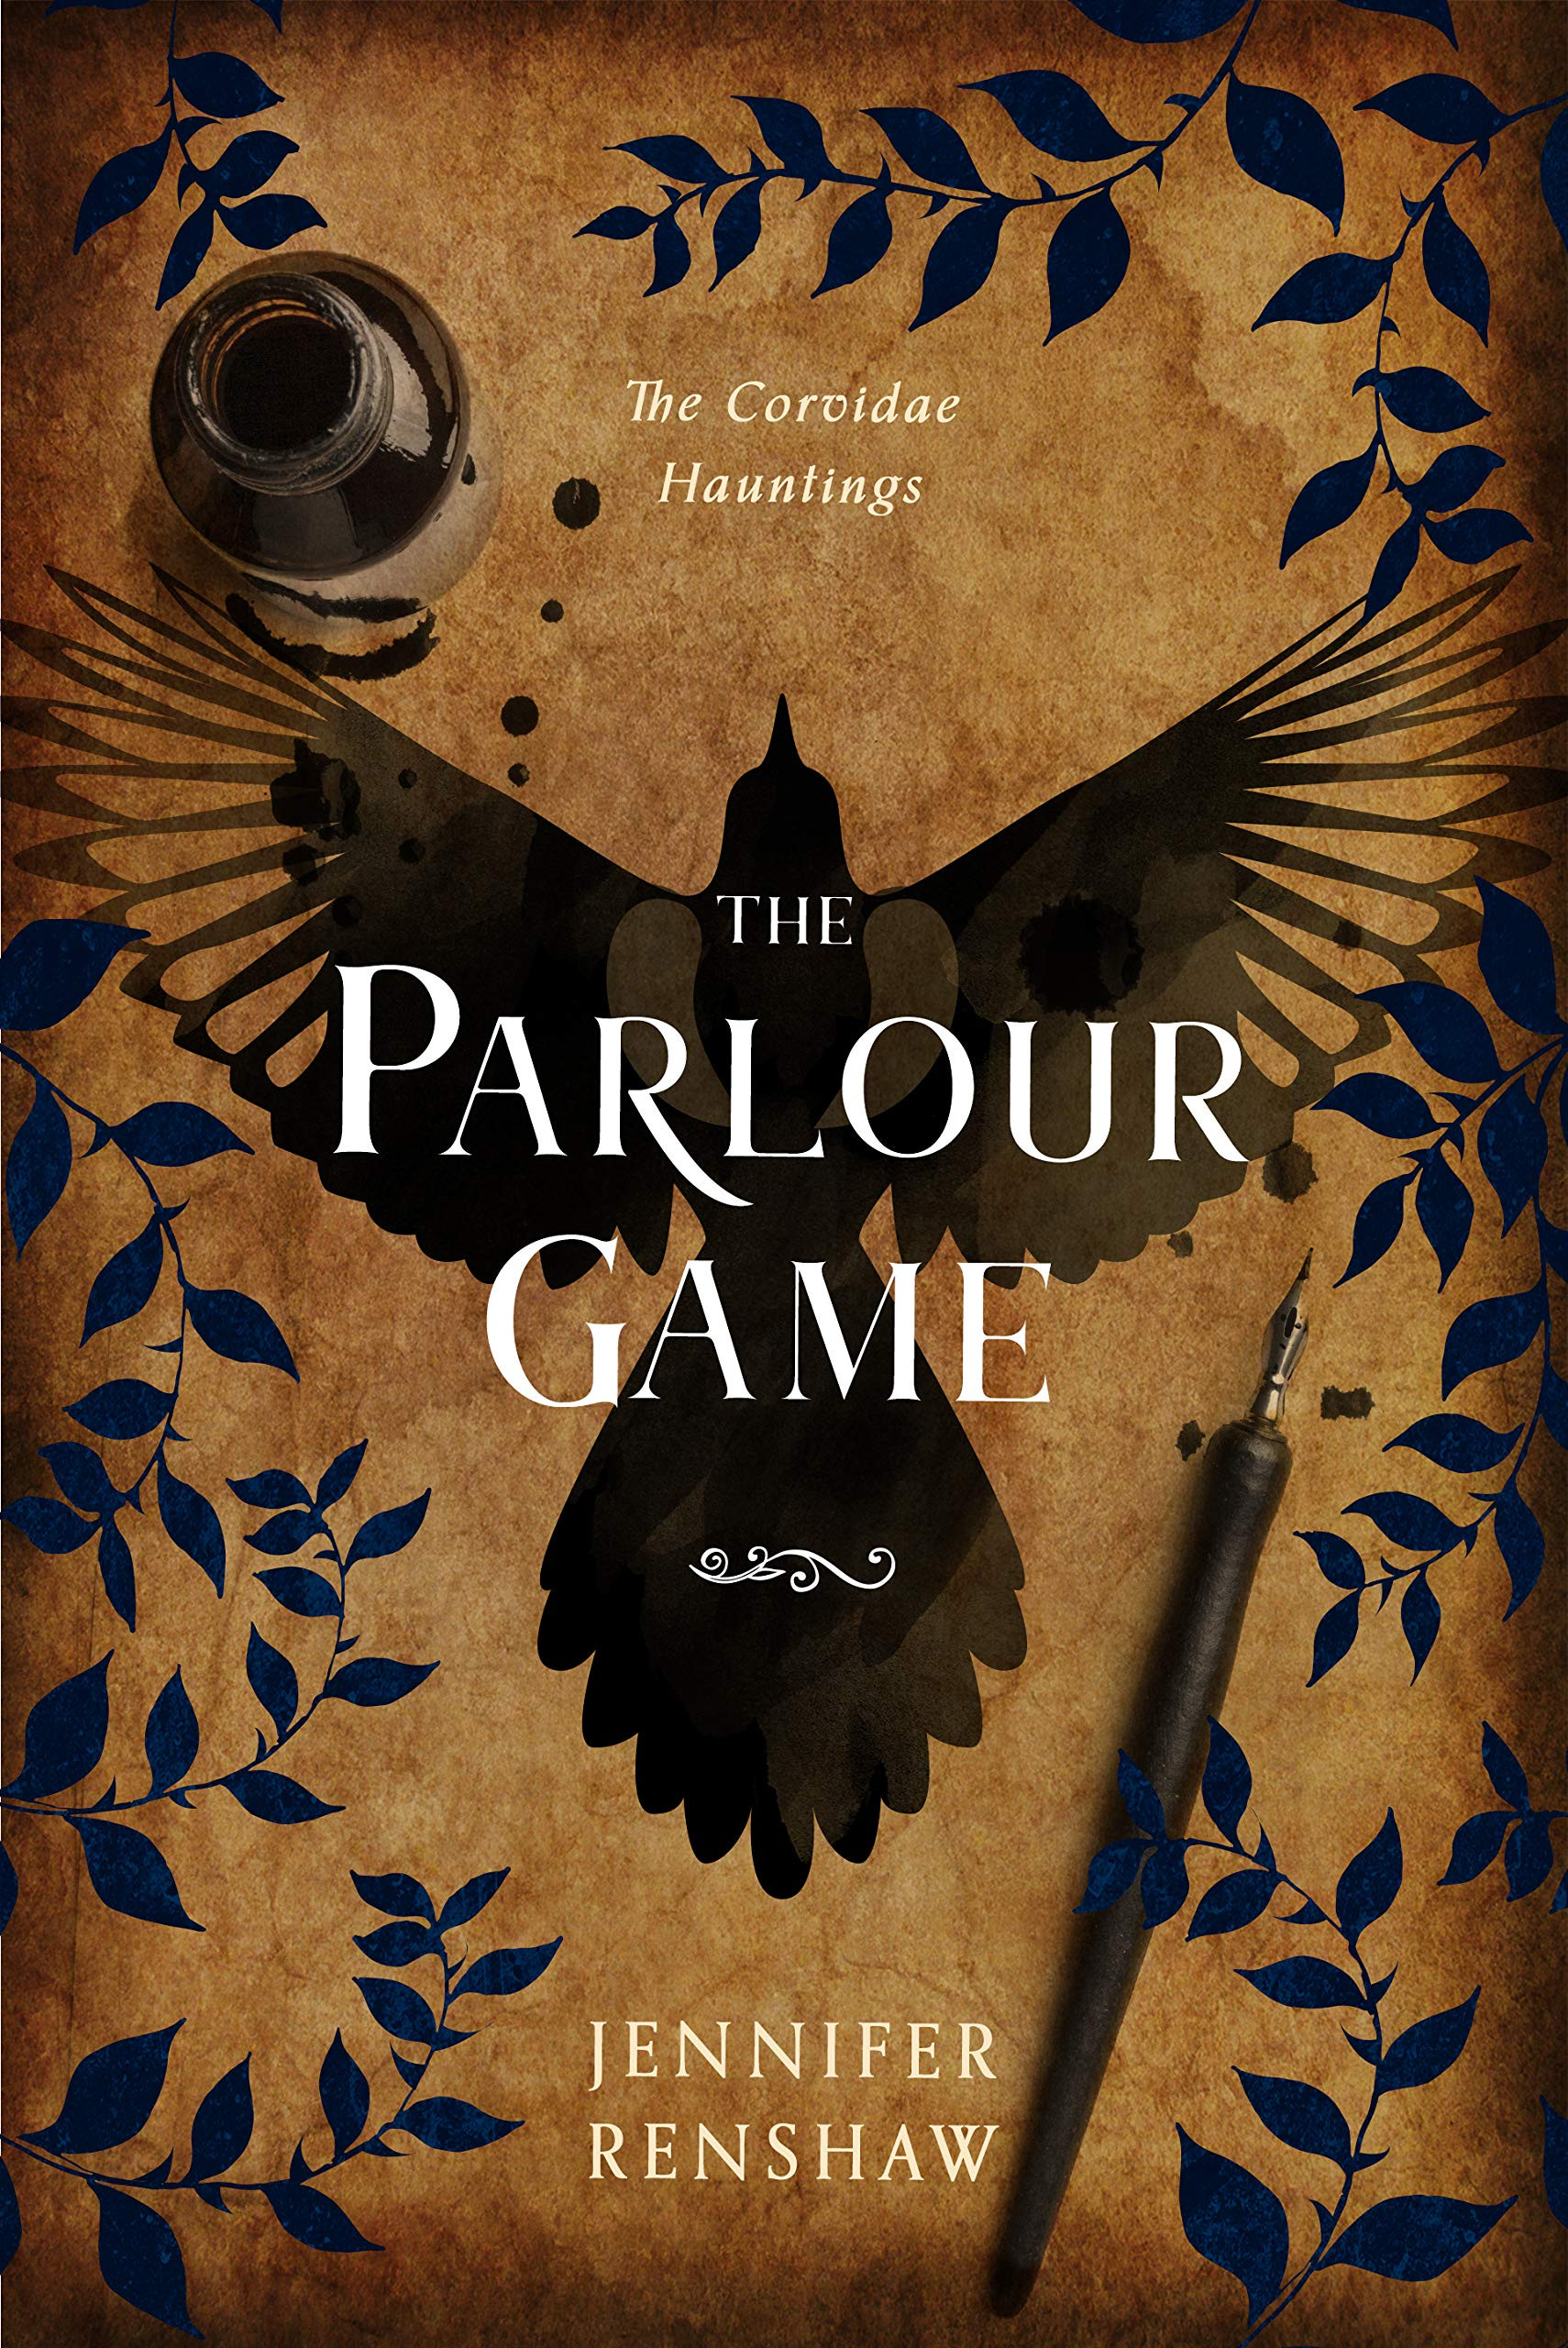 The Parlour Game